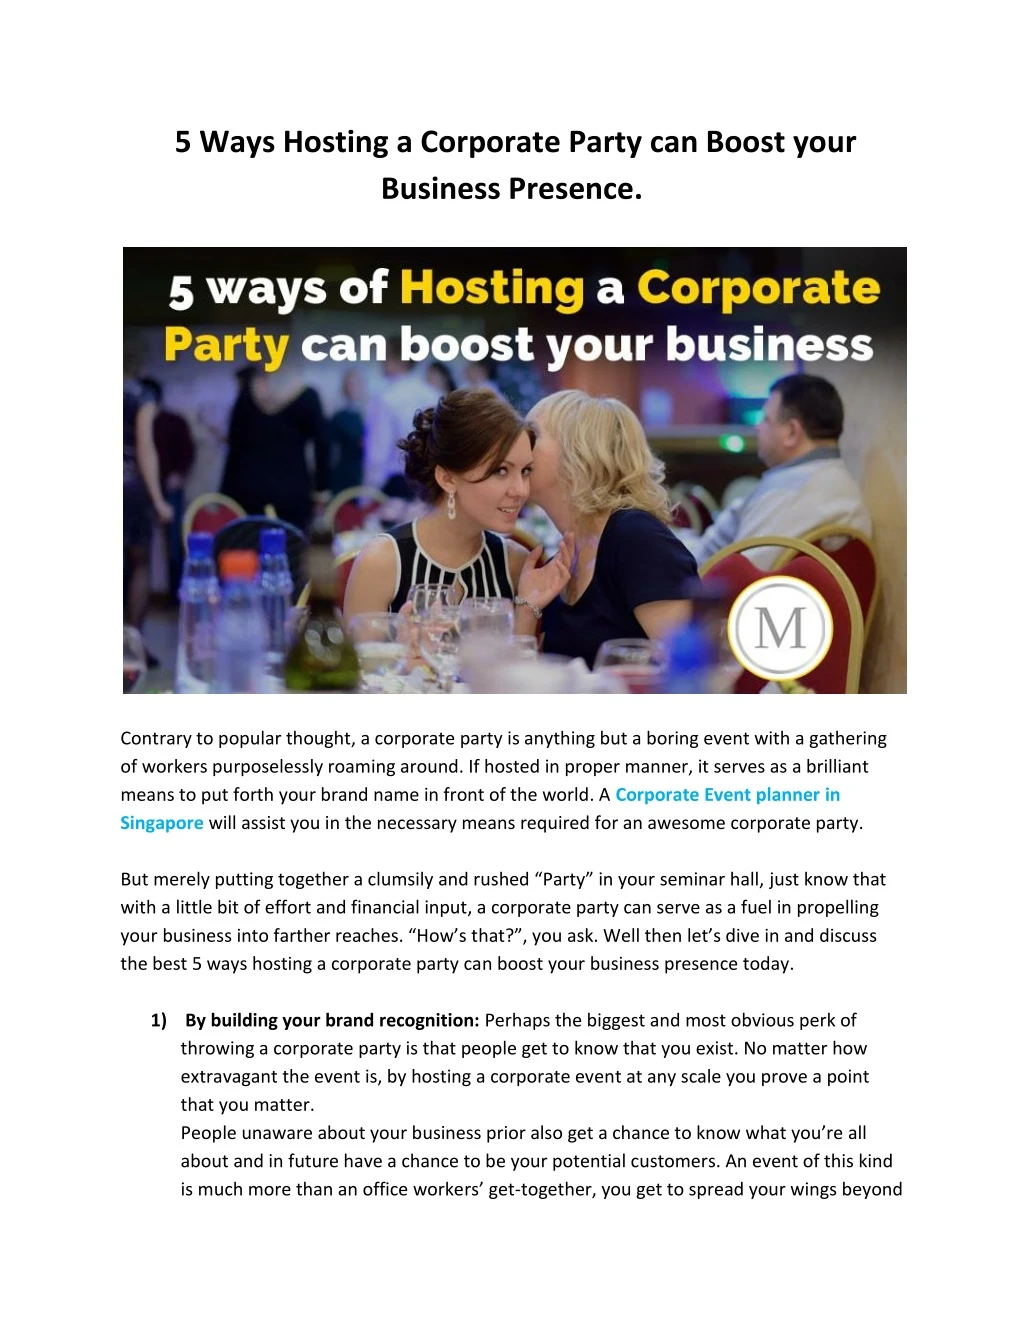 5 ways hosting a corporate party can boost your